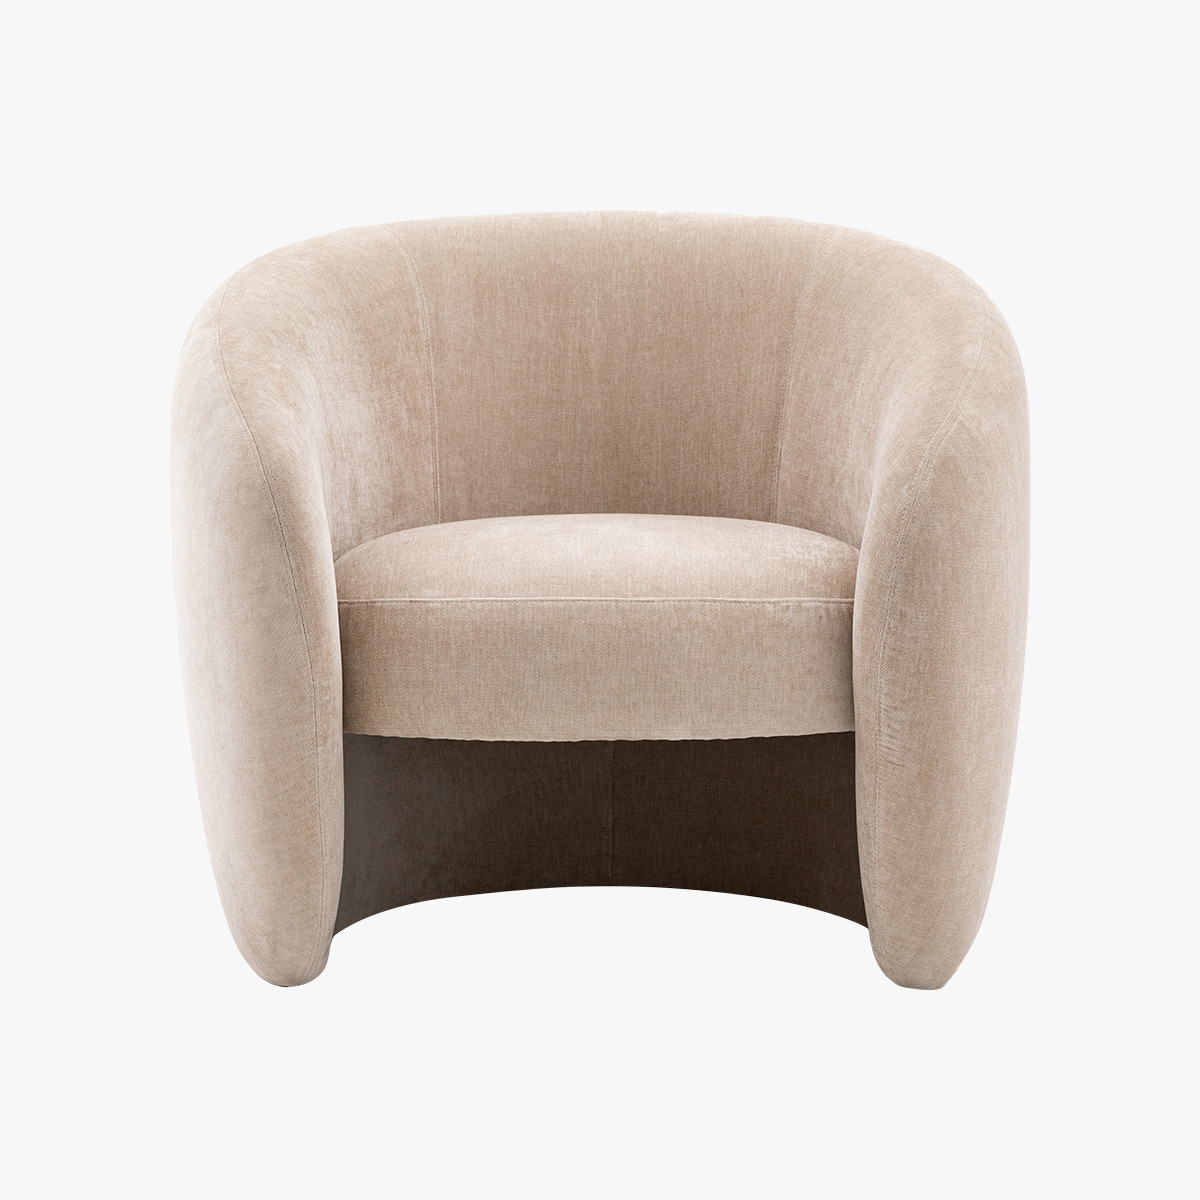 Mellow-out Armchair in Cream